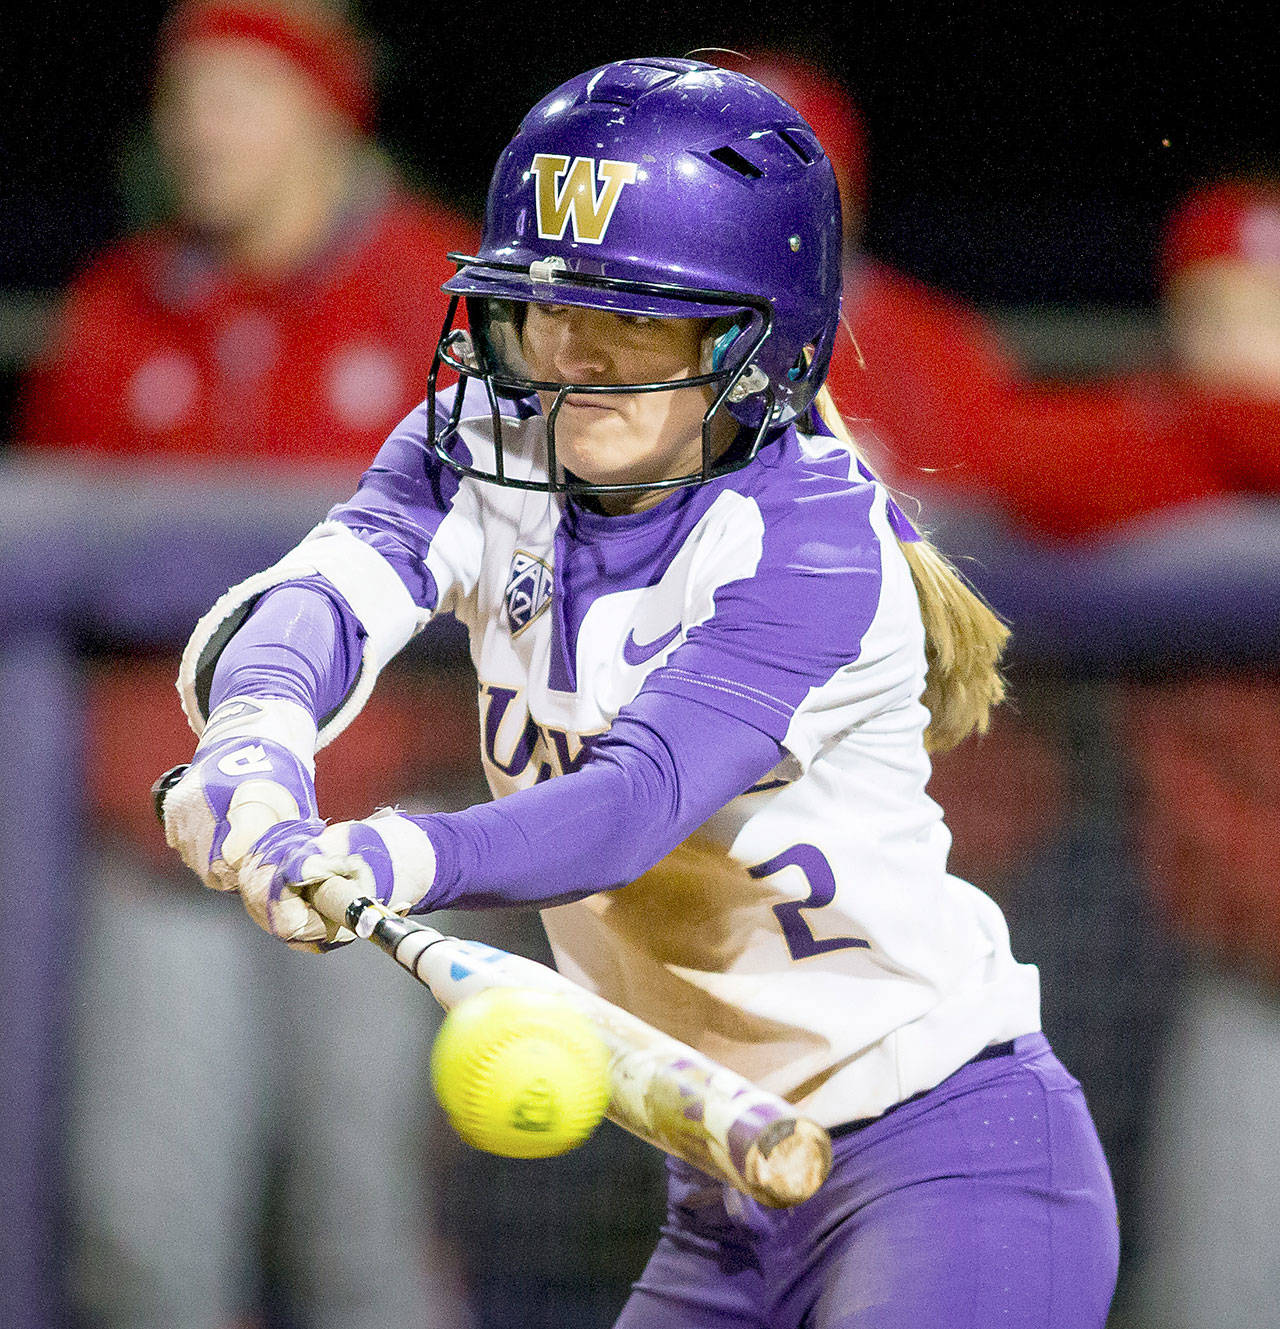 University of Washington softball player Trystan Melhart was a finalist for The Herald’s 2016 Woman of the Year in Sports. (Photography by Scott Eklund/Red Box Pictures)